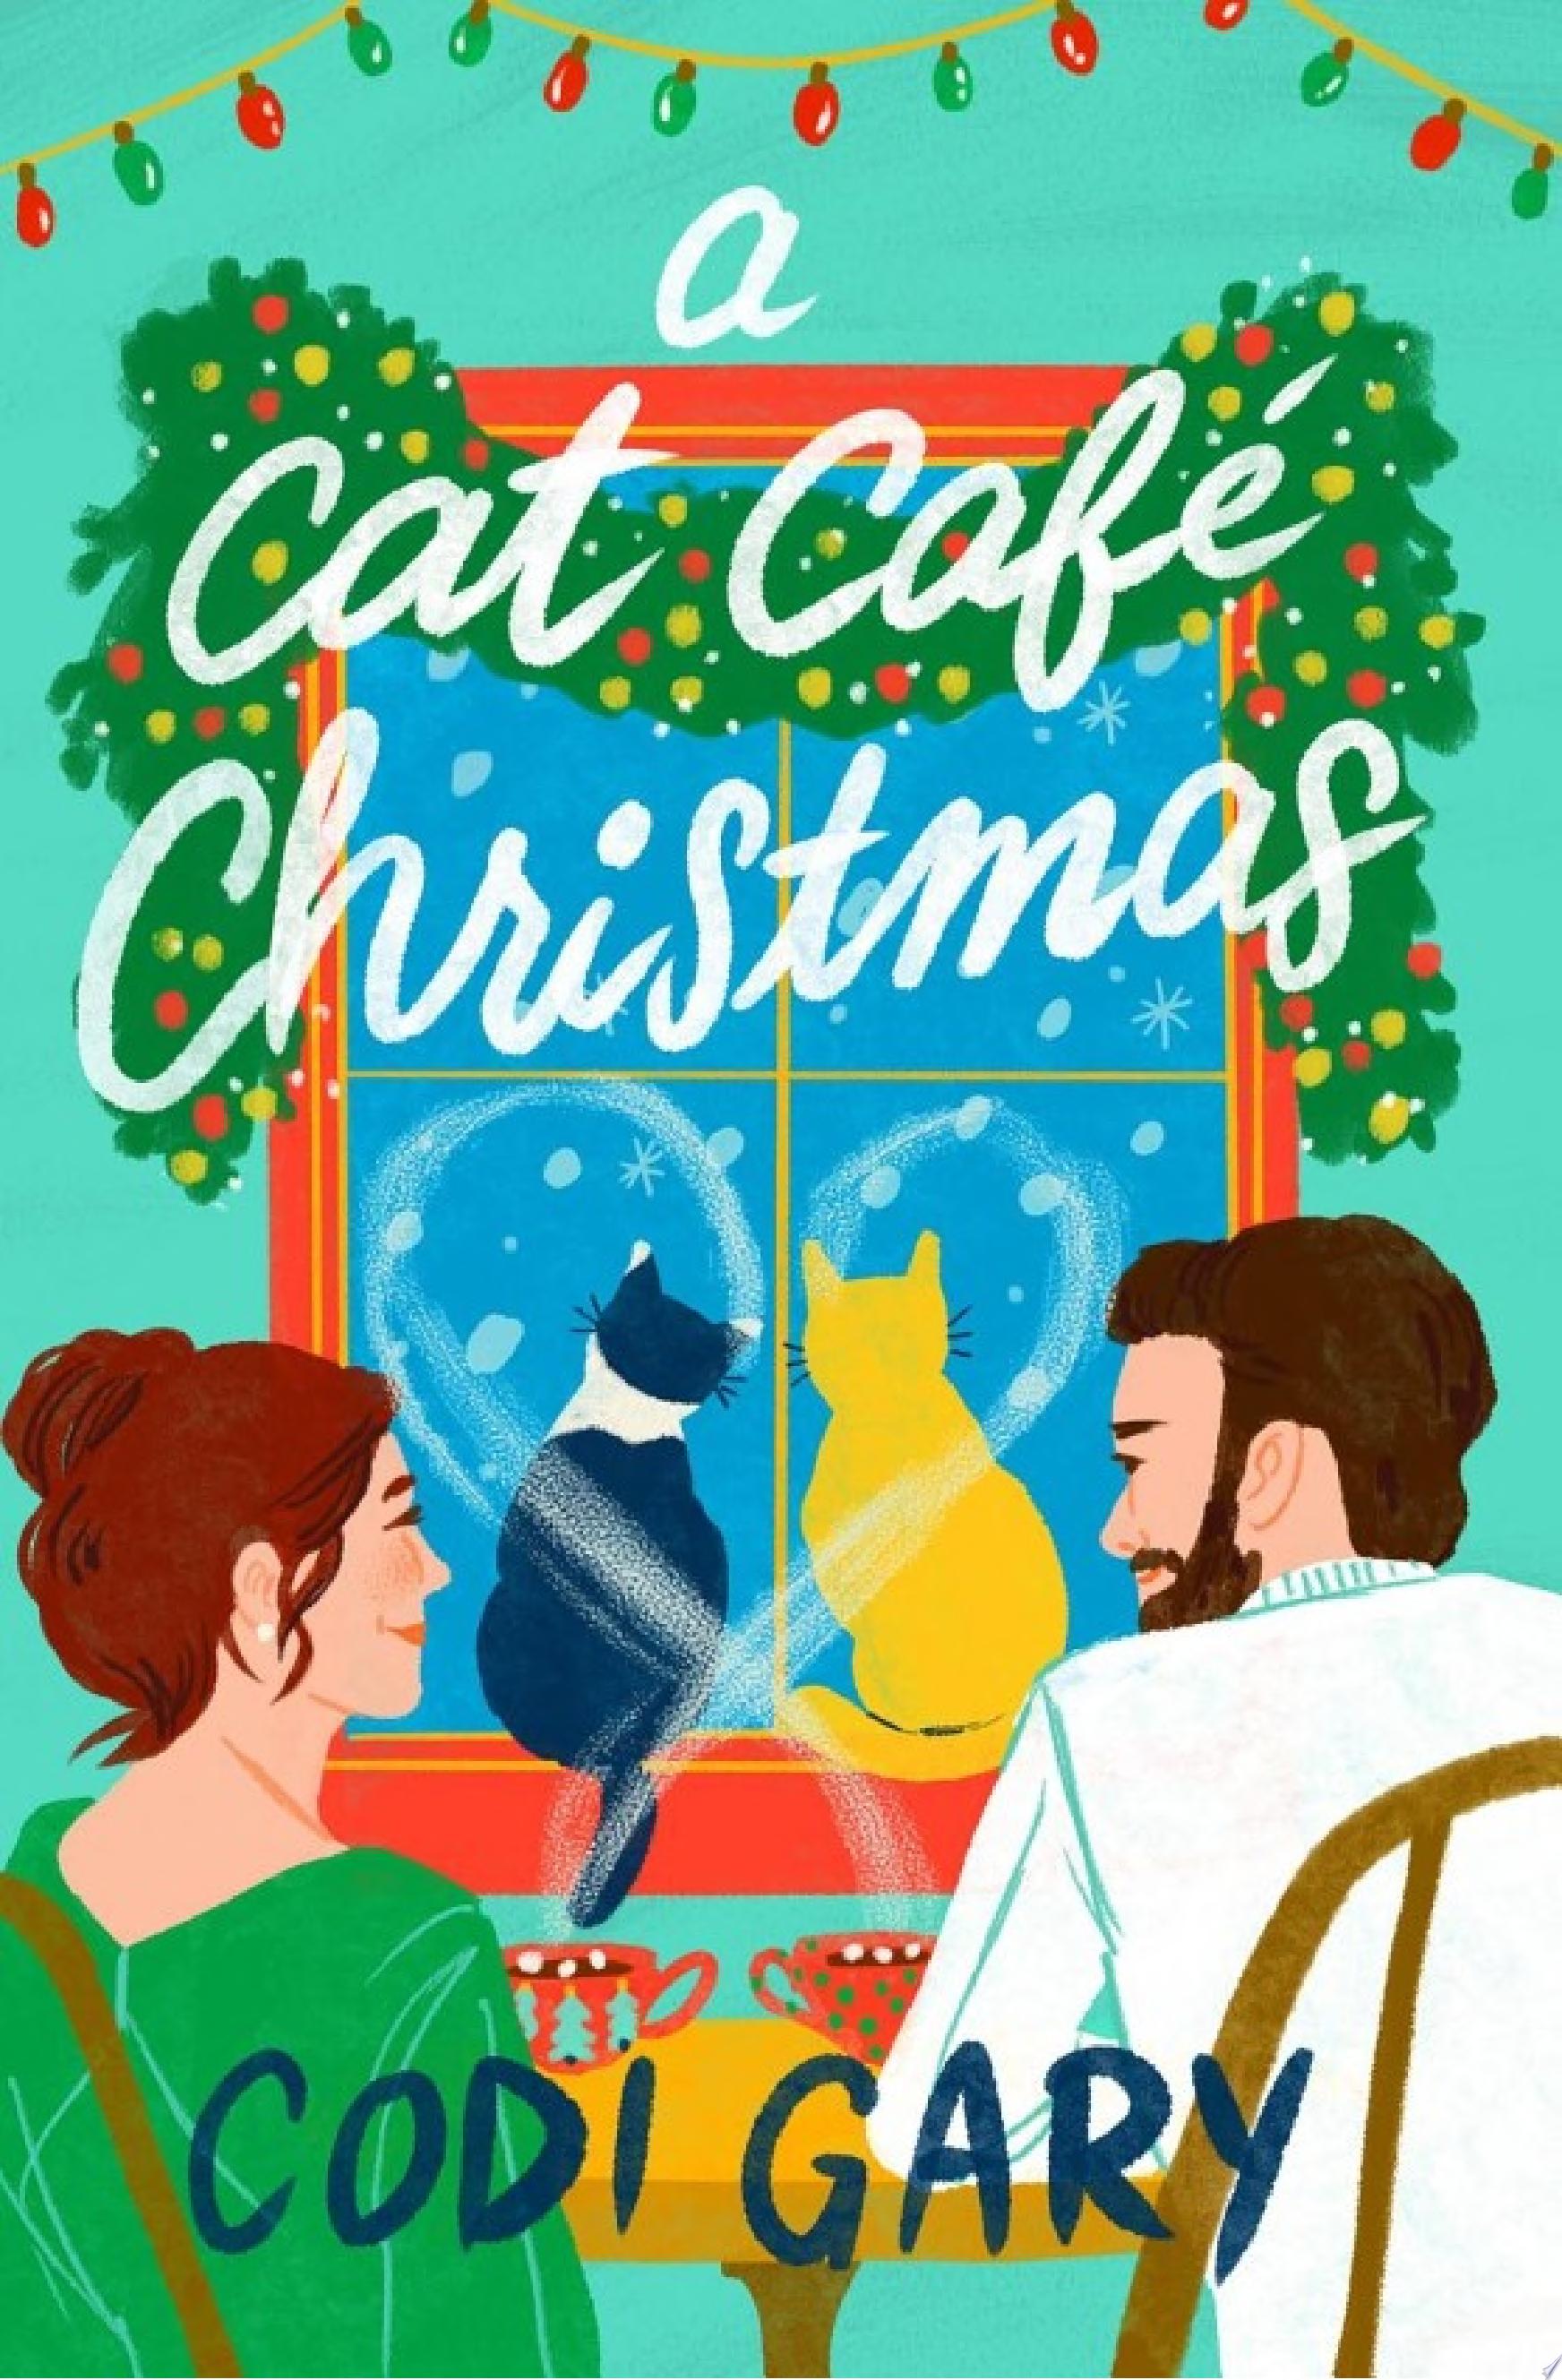 Image for "A Cat Cafe Christmas"